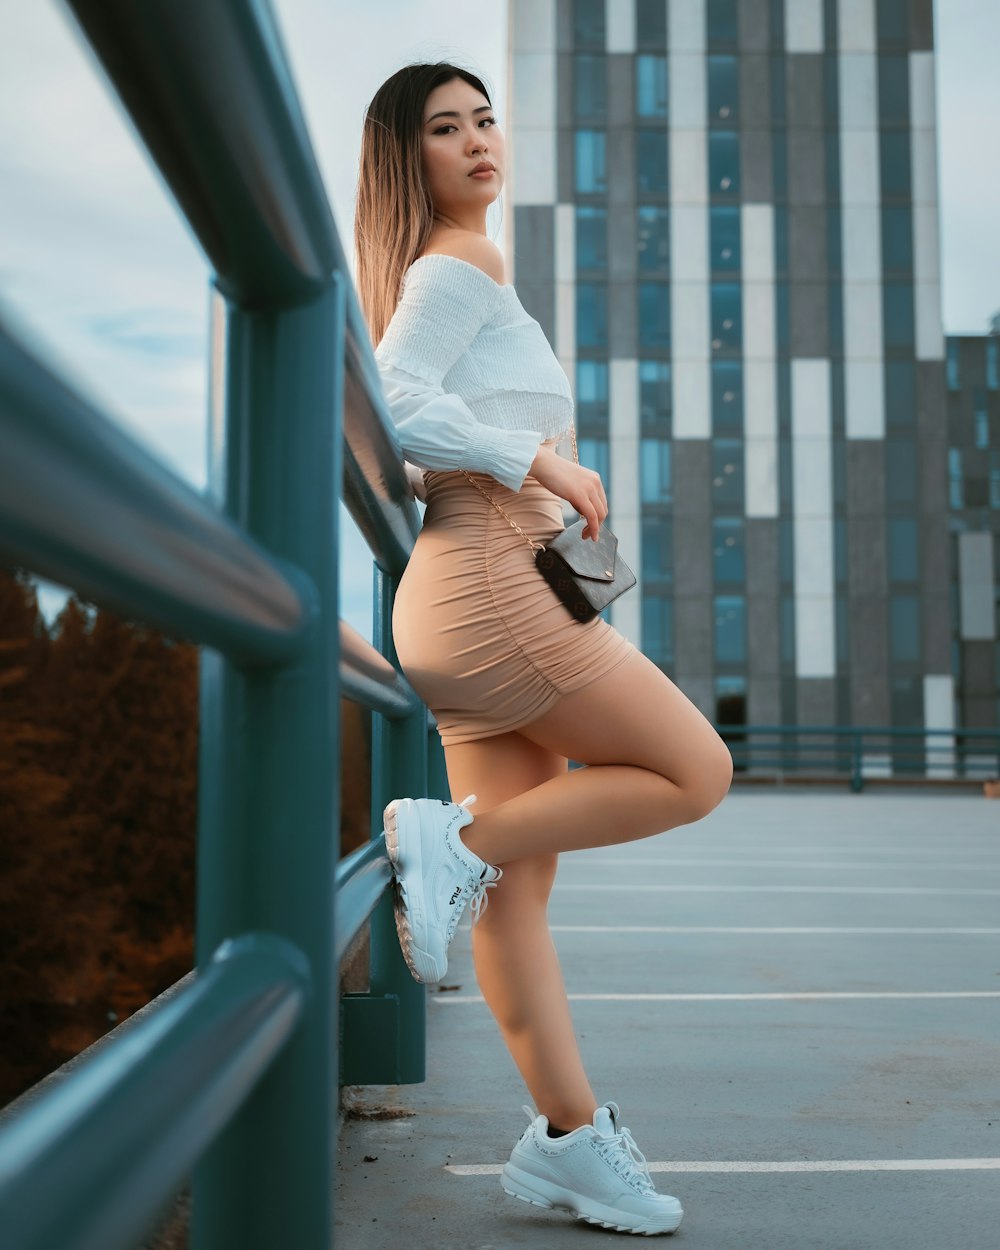 woman in white shirt and brown skirt leaning on blue metal railings